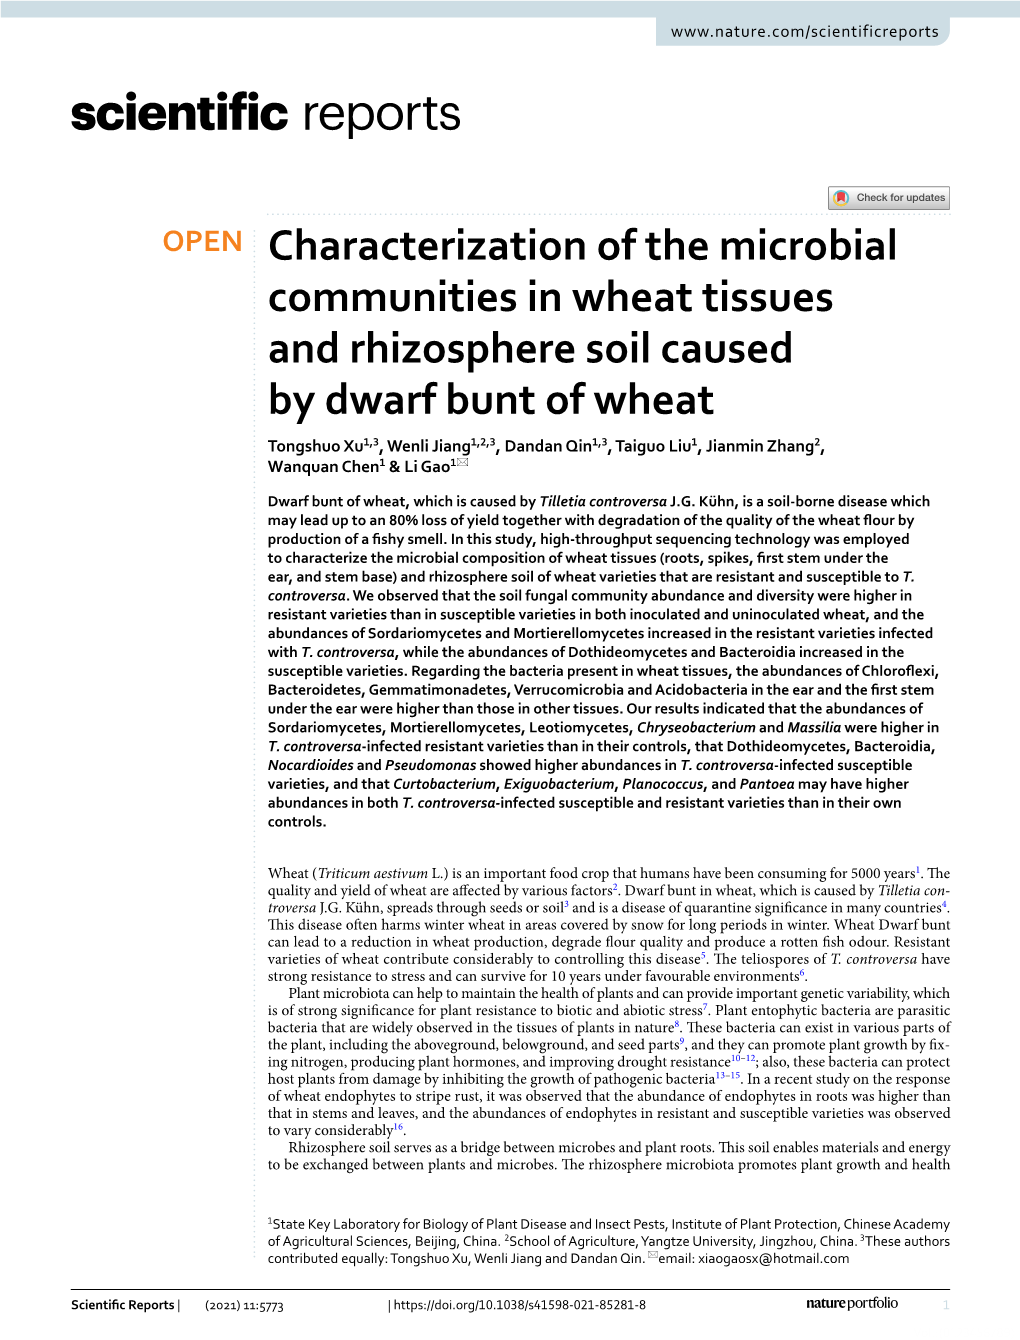 Characterization of the Microbial Communities in Wheat Tissues And